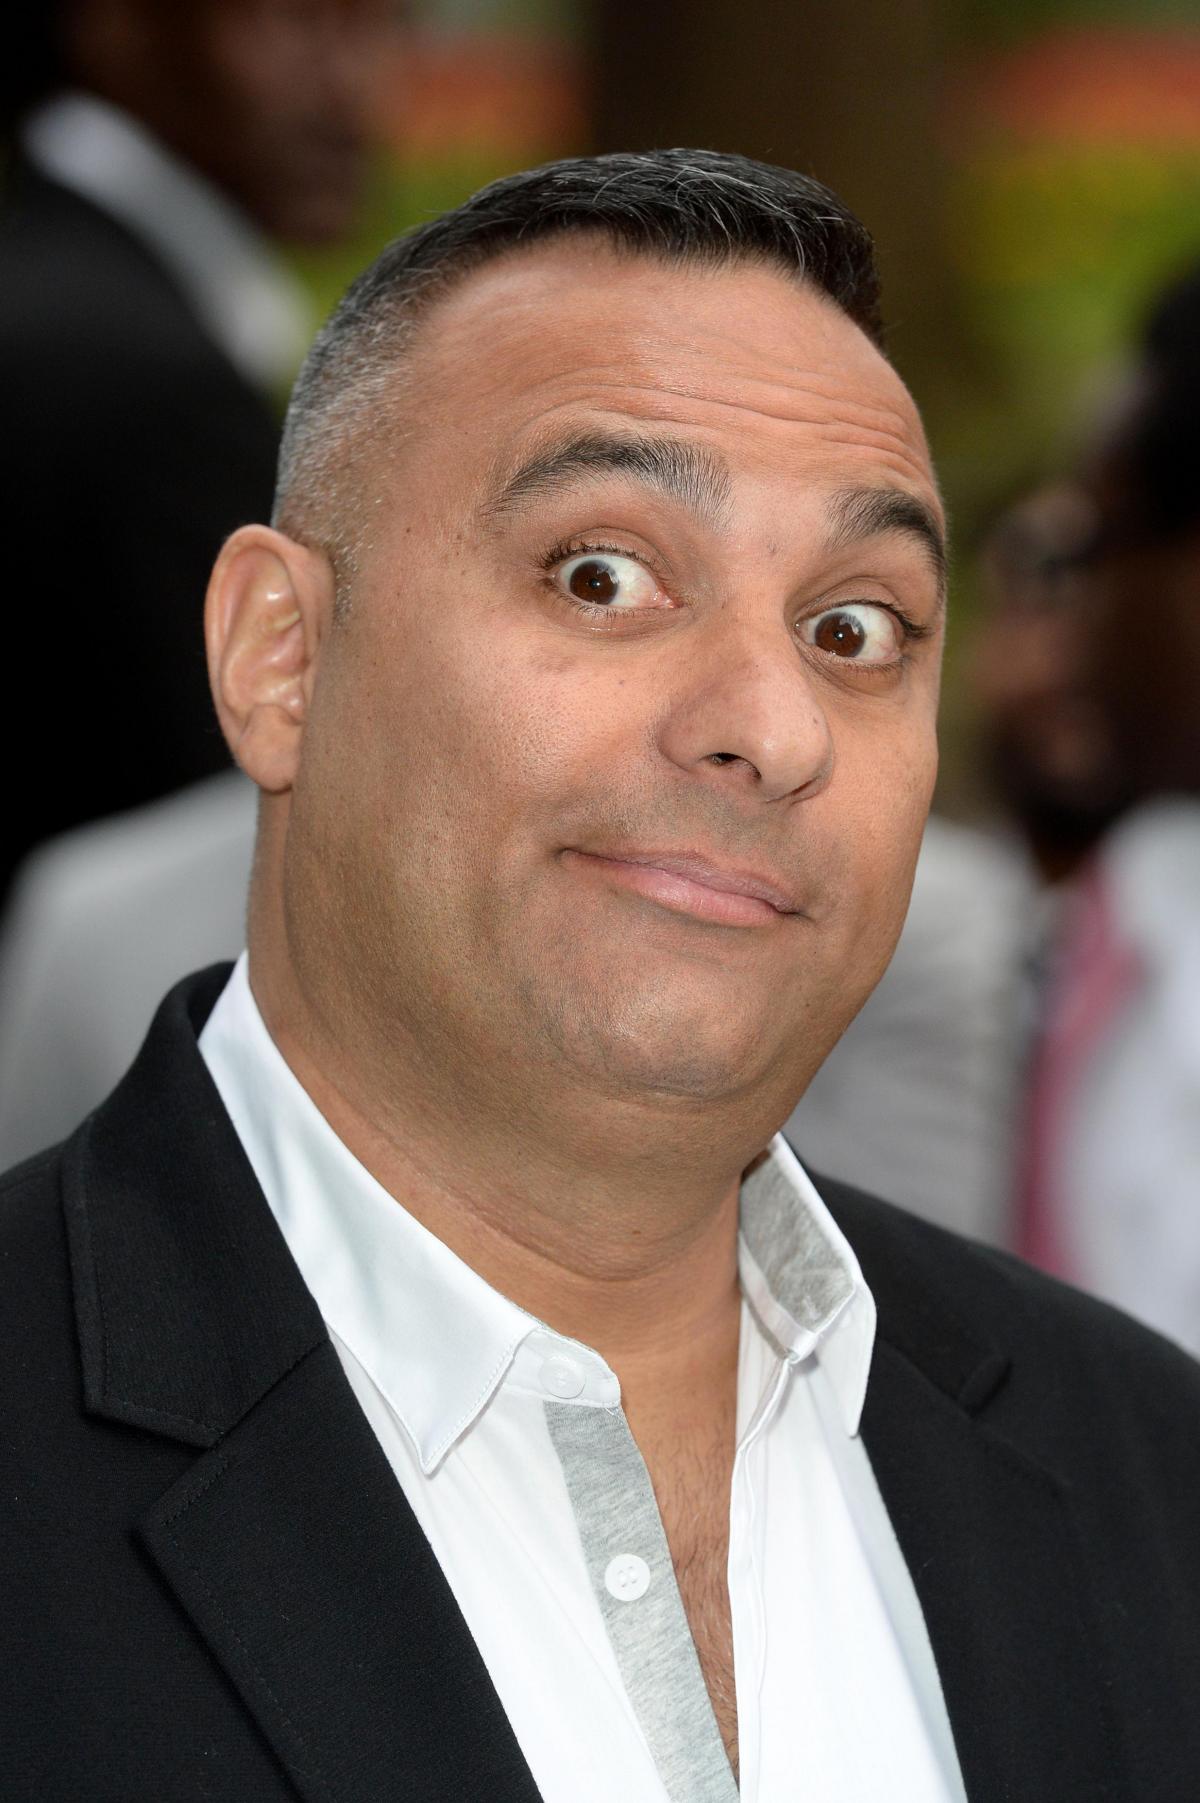 Russell Peters attending the 2015 British Asian Awards at The Grosvenor House Hotel, London.